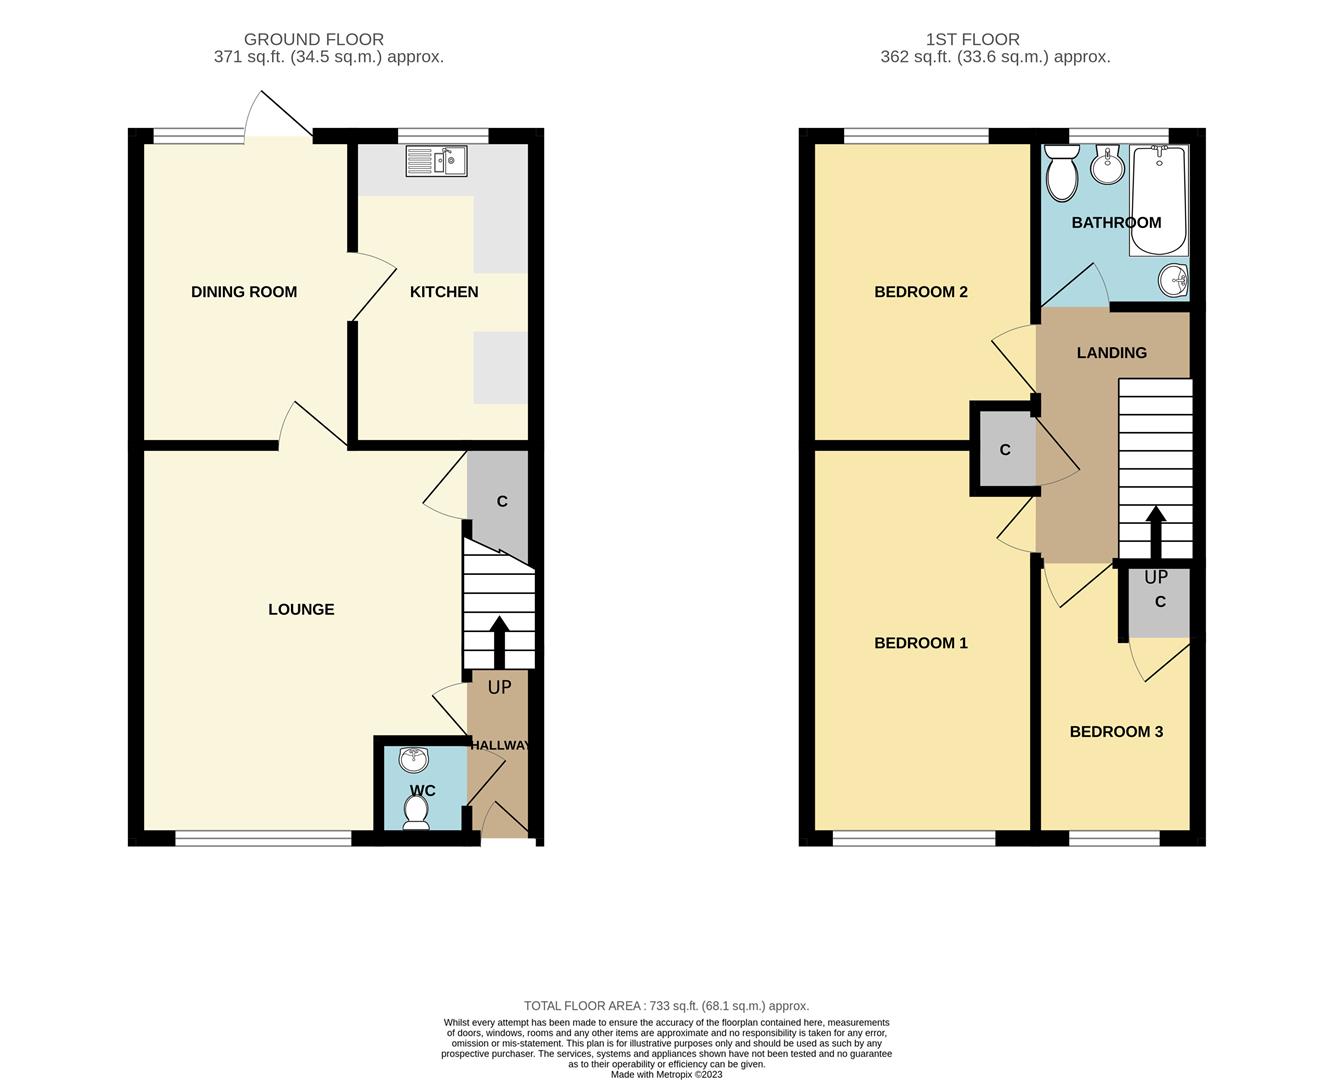 3 bed terraced house for sale - Property floorplan